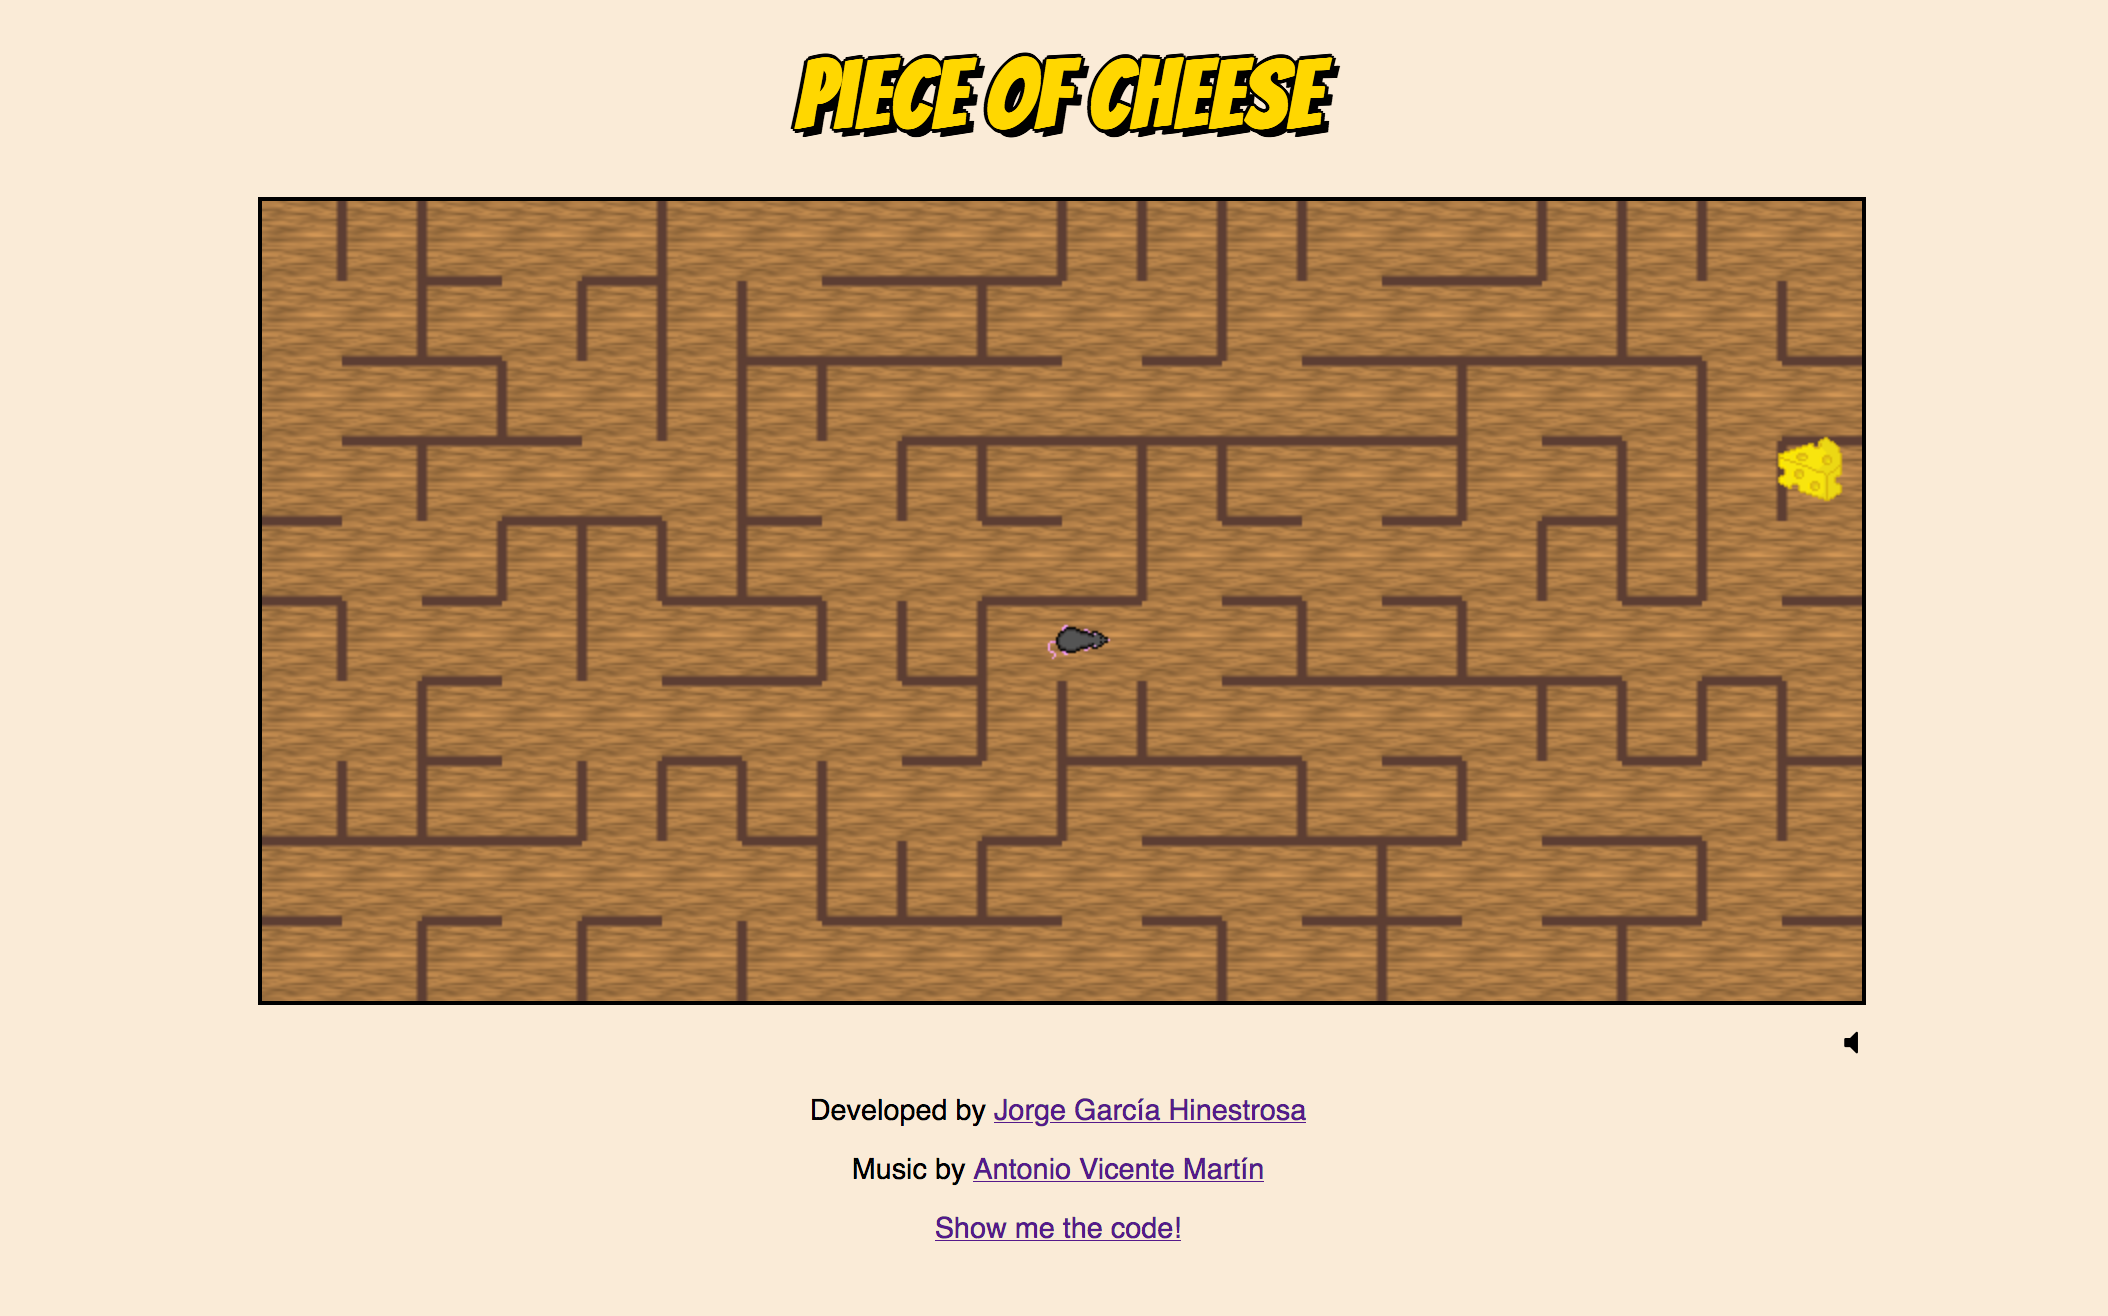 A snapshot of the website which shows a maze, a rat sprite and a cheese sprite at the end of the maze